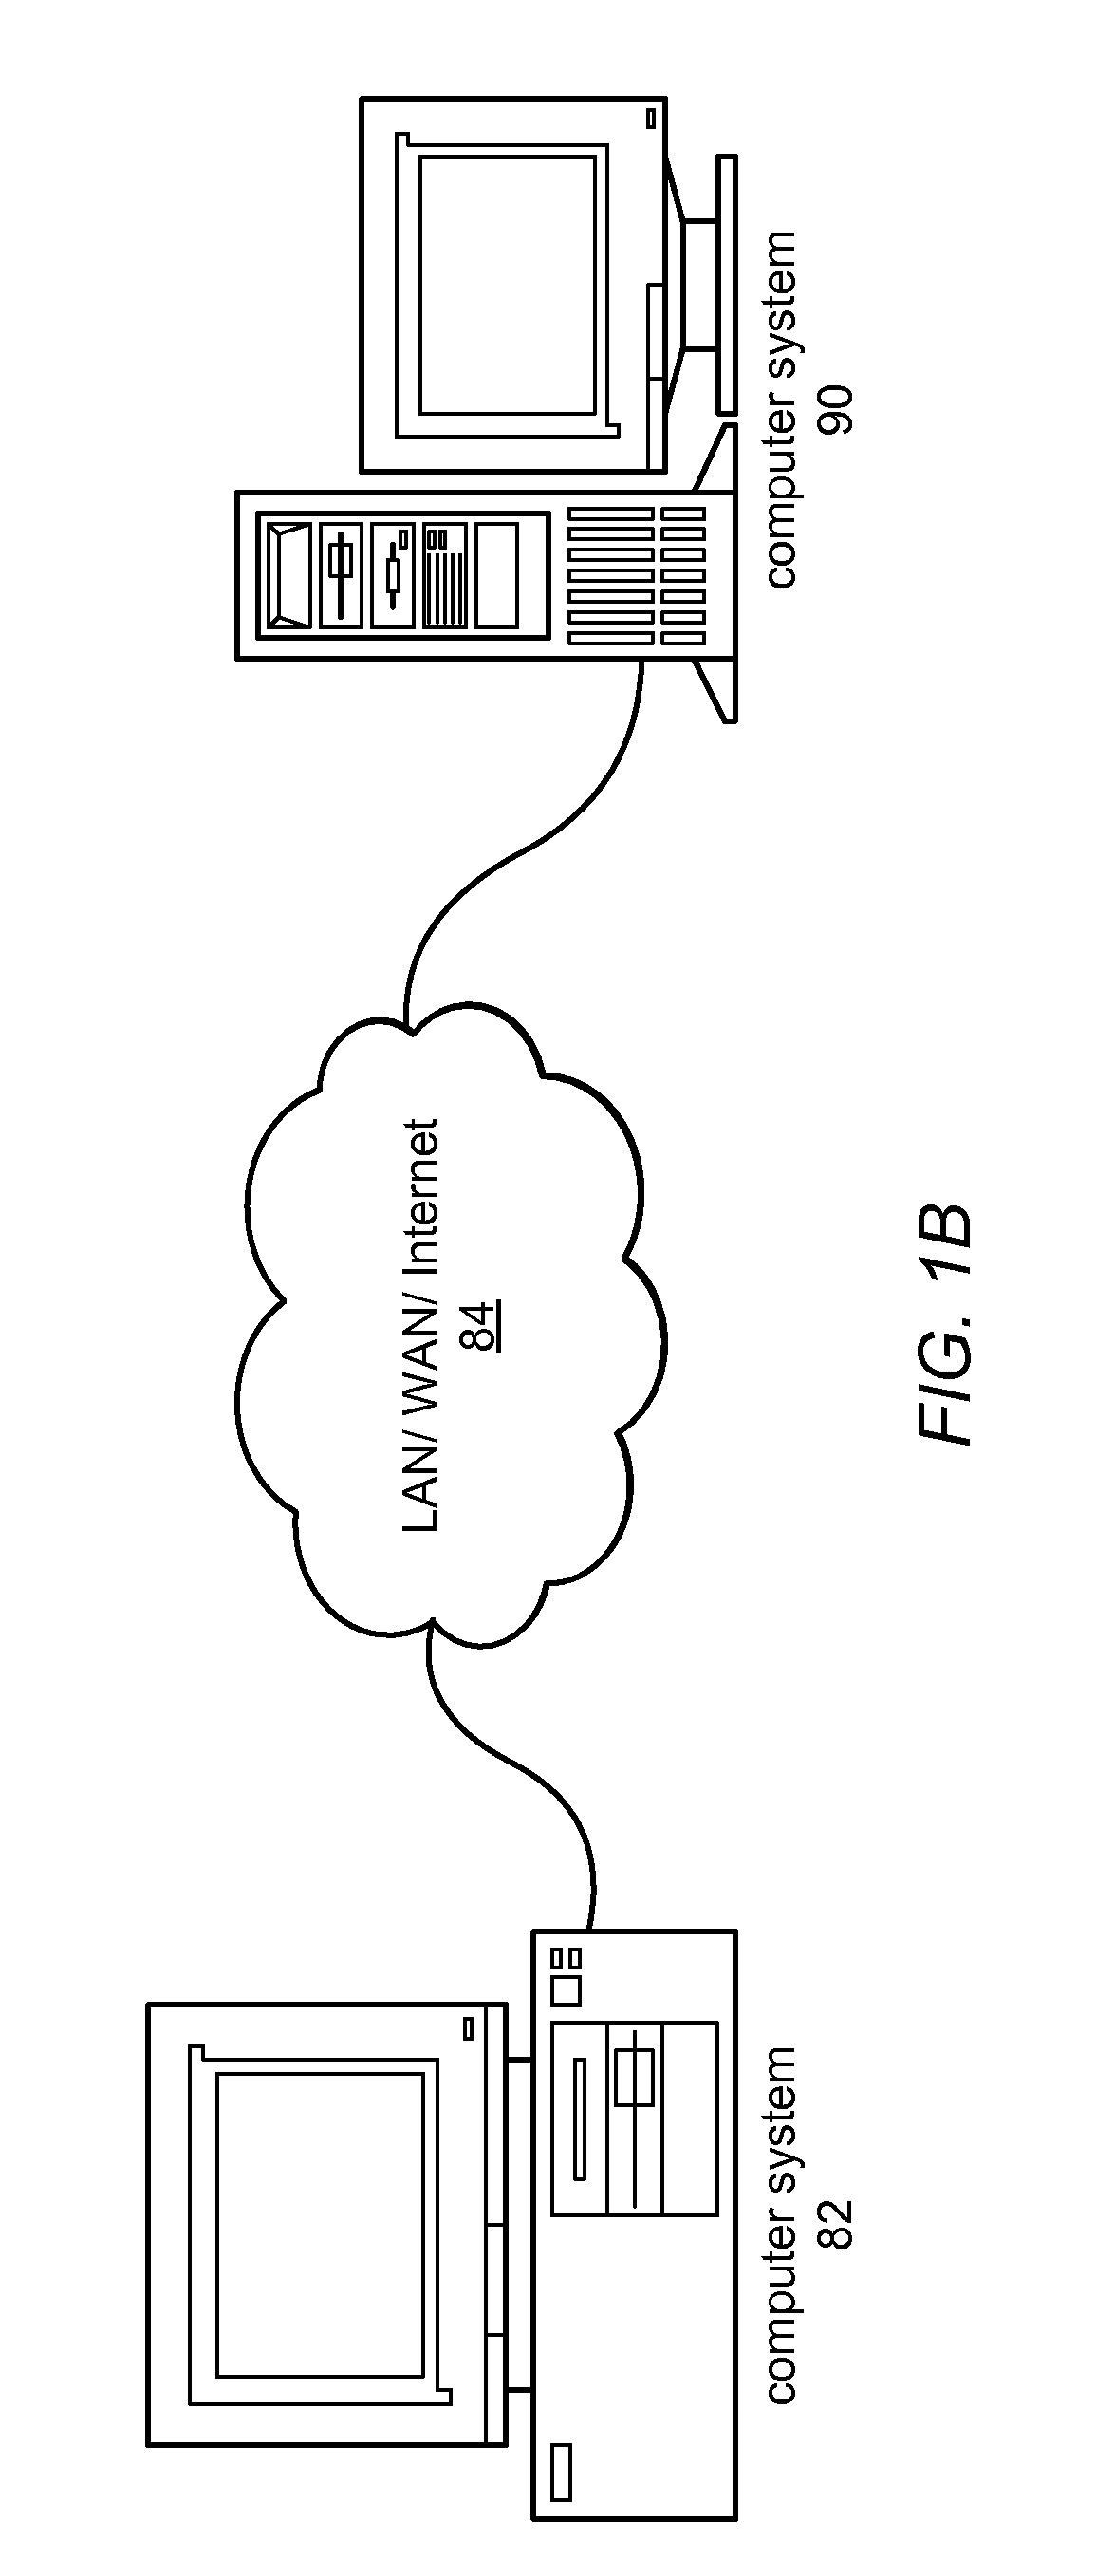 Automatic Conversion of Text-Based Code Having Function Overloading and Dynamic Types into a Graphical Program for Compiled Execution